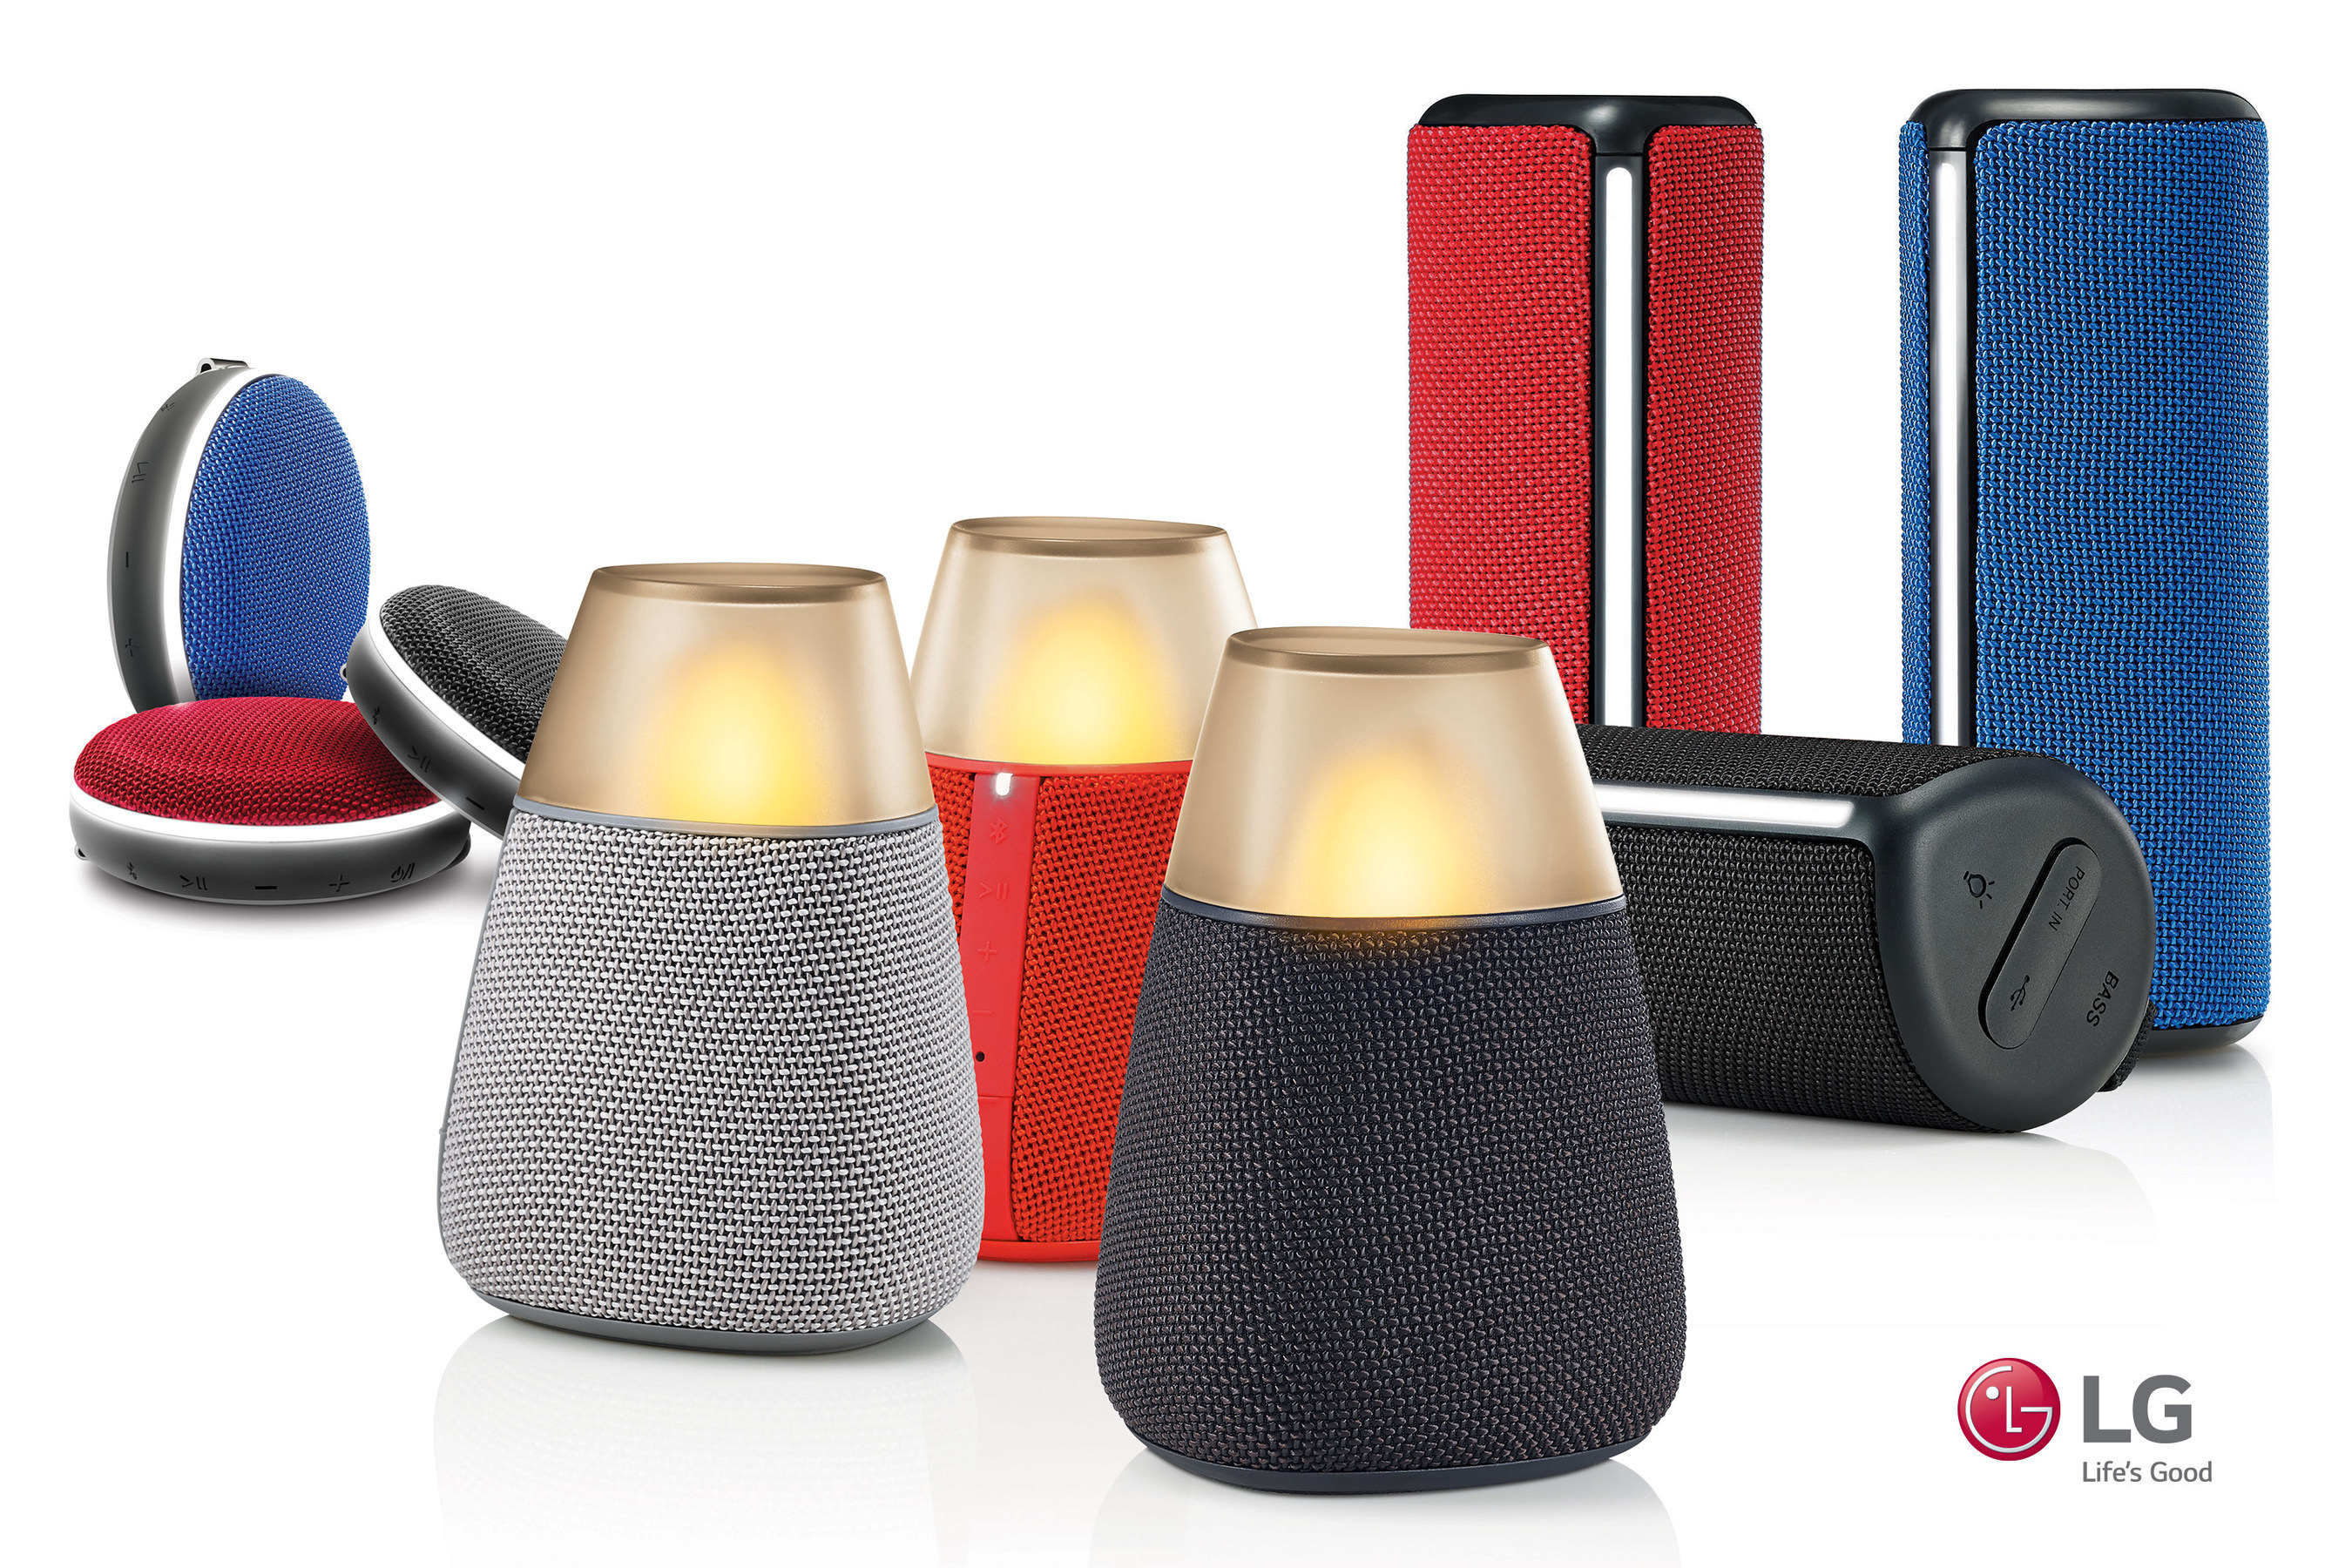 LG Electronics expands U.S. audio line with portable Bluetooth speakers.